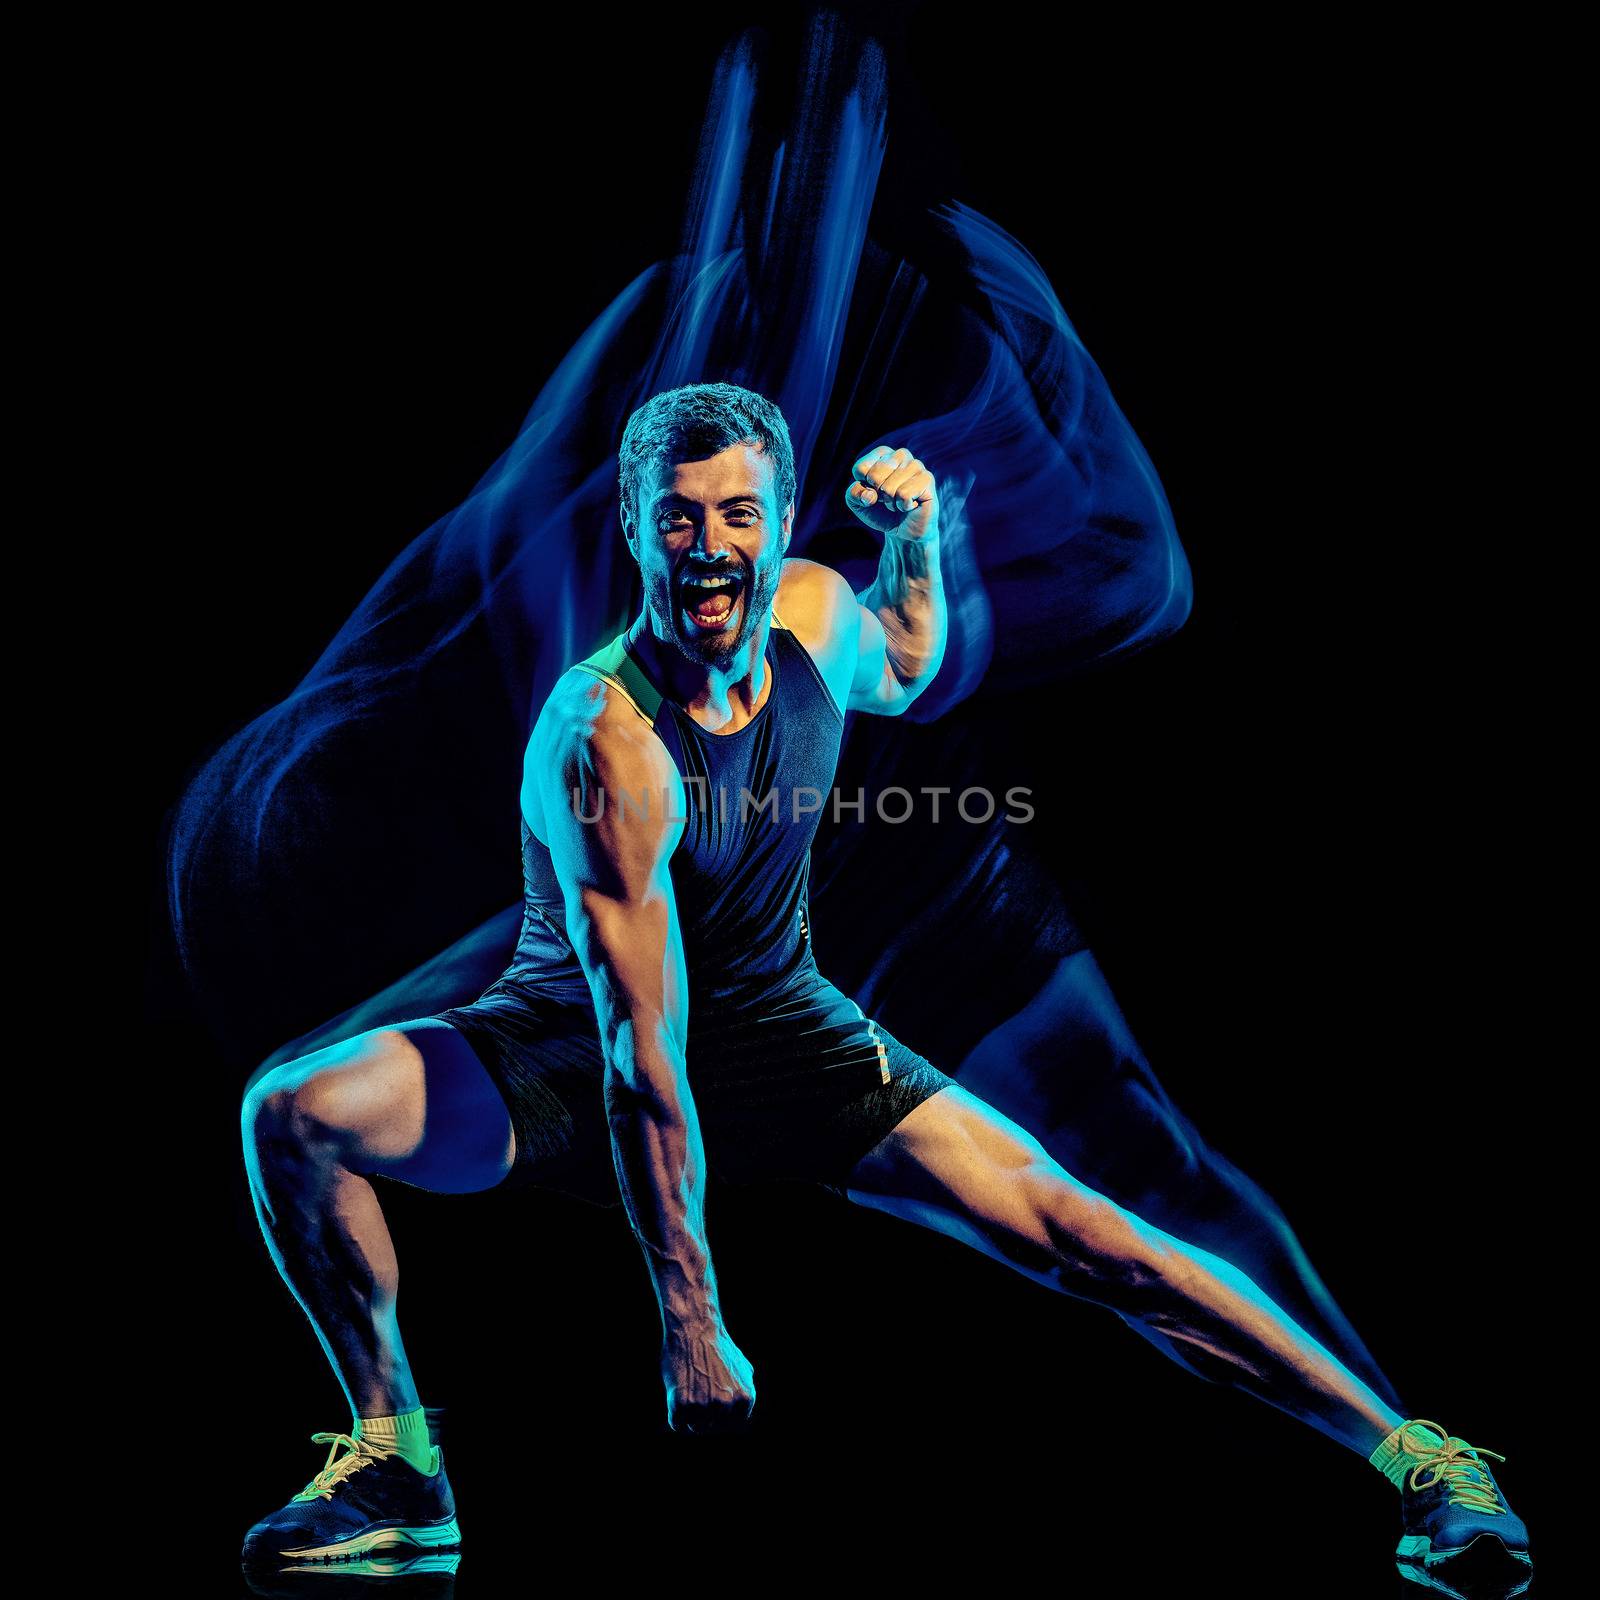 one caucasian player man exercising fitness cardio boxing exercise body combat studio shot isolated on black background with light painting blur effect